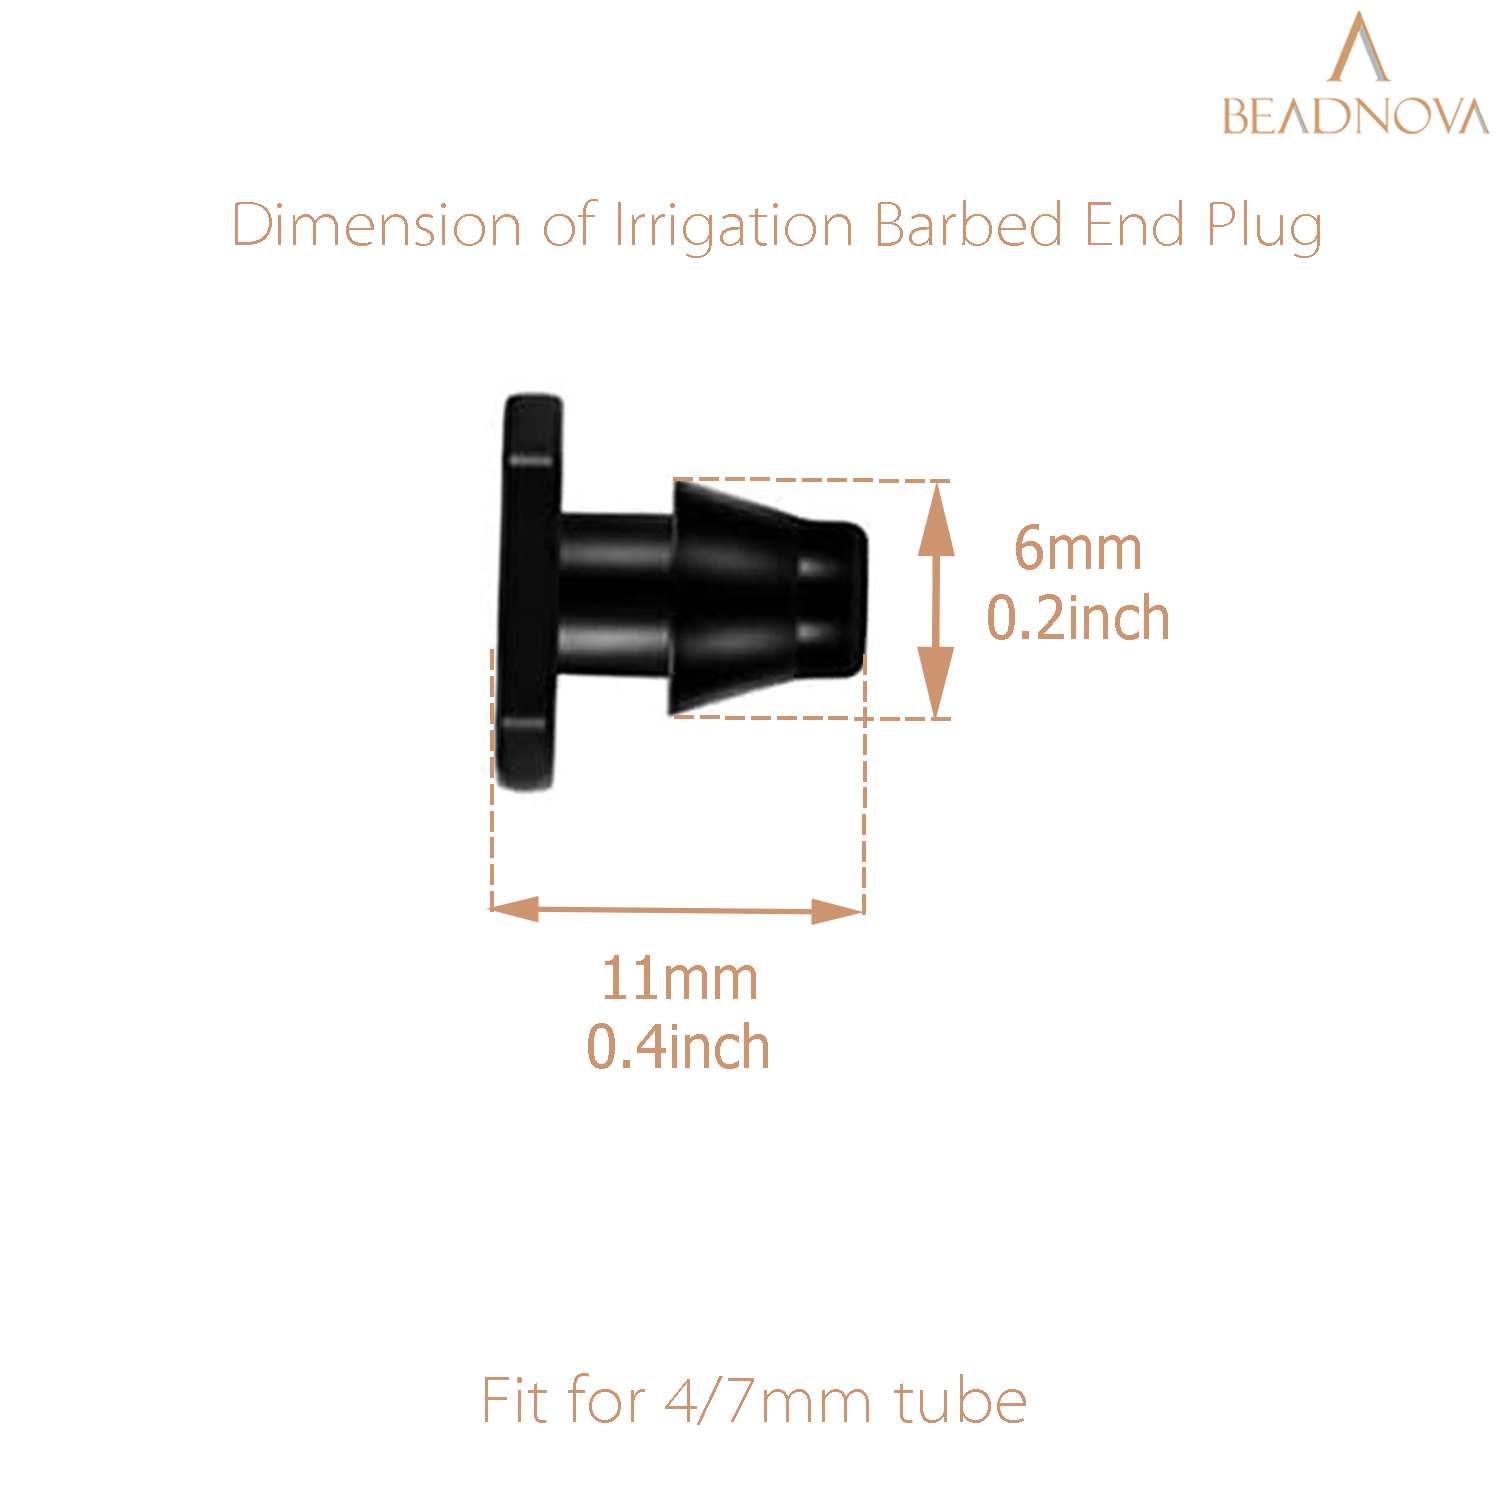 0.600 ID Drip Line End Closure for Drip and Sprinkler Systems 17mm End Cap Connectors for 1/2 Inch Irrigation Tubing iRunning 18 Pieces Drip Irrigation 1/2 Tubing End Plugs Fittings 